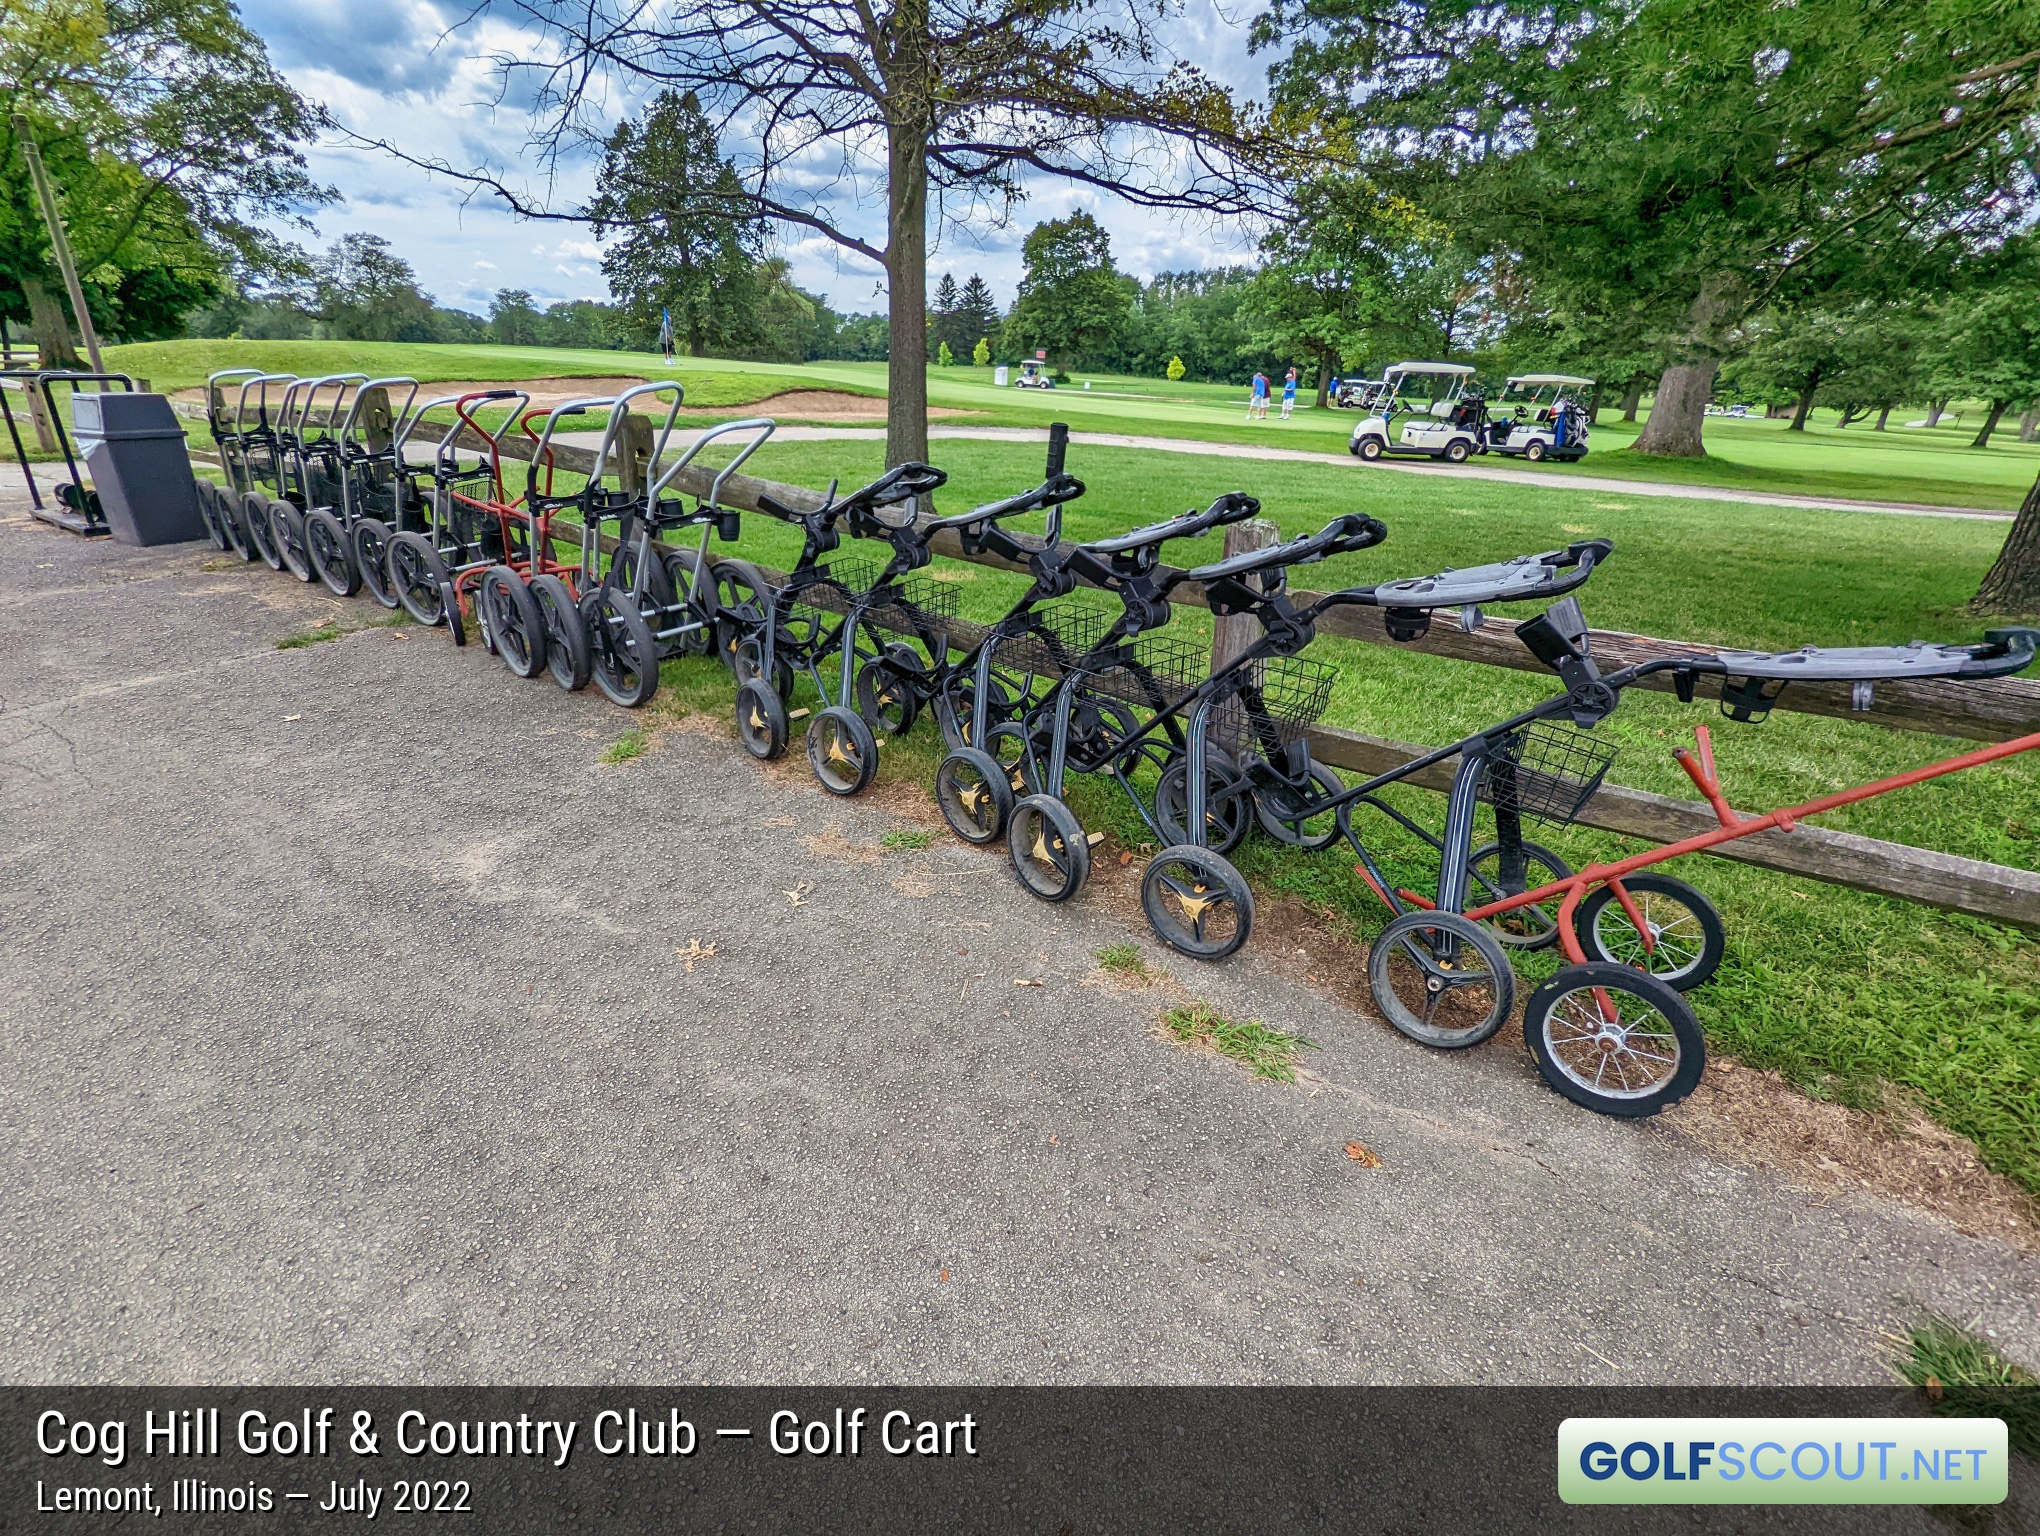 Photo of the golf carts at Cog Hill Course #3 in Lemont, Illinois. Lots of different varieties.